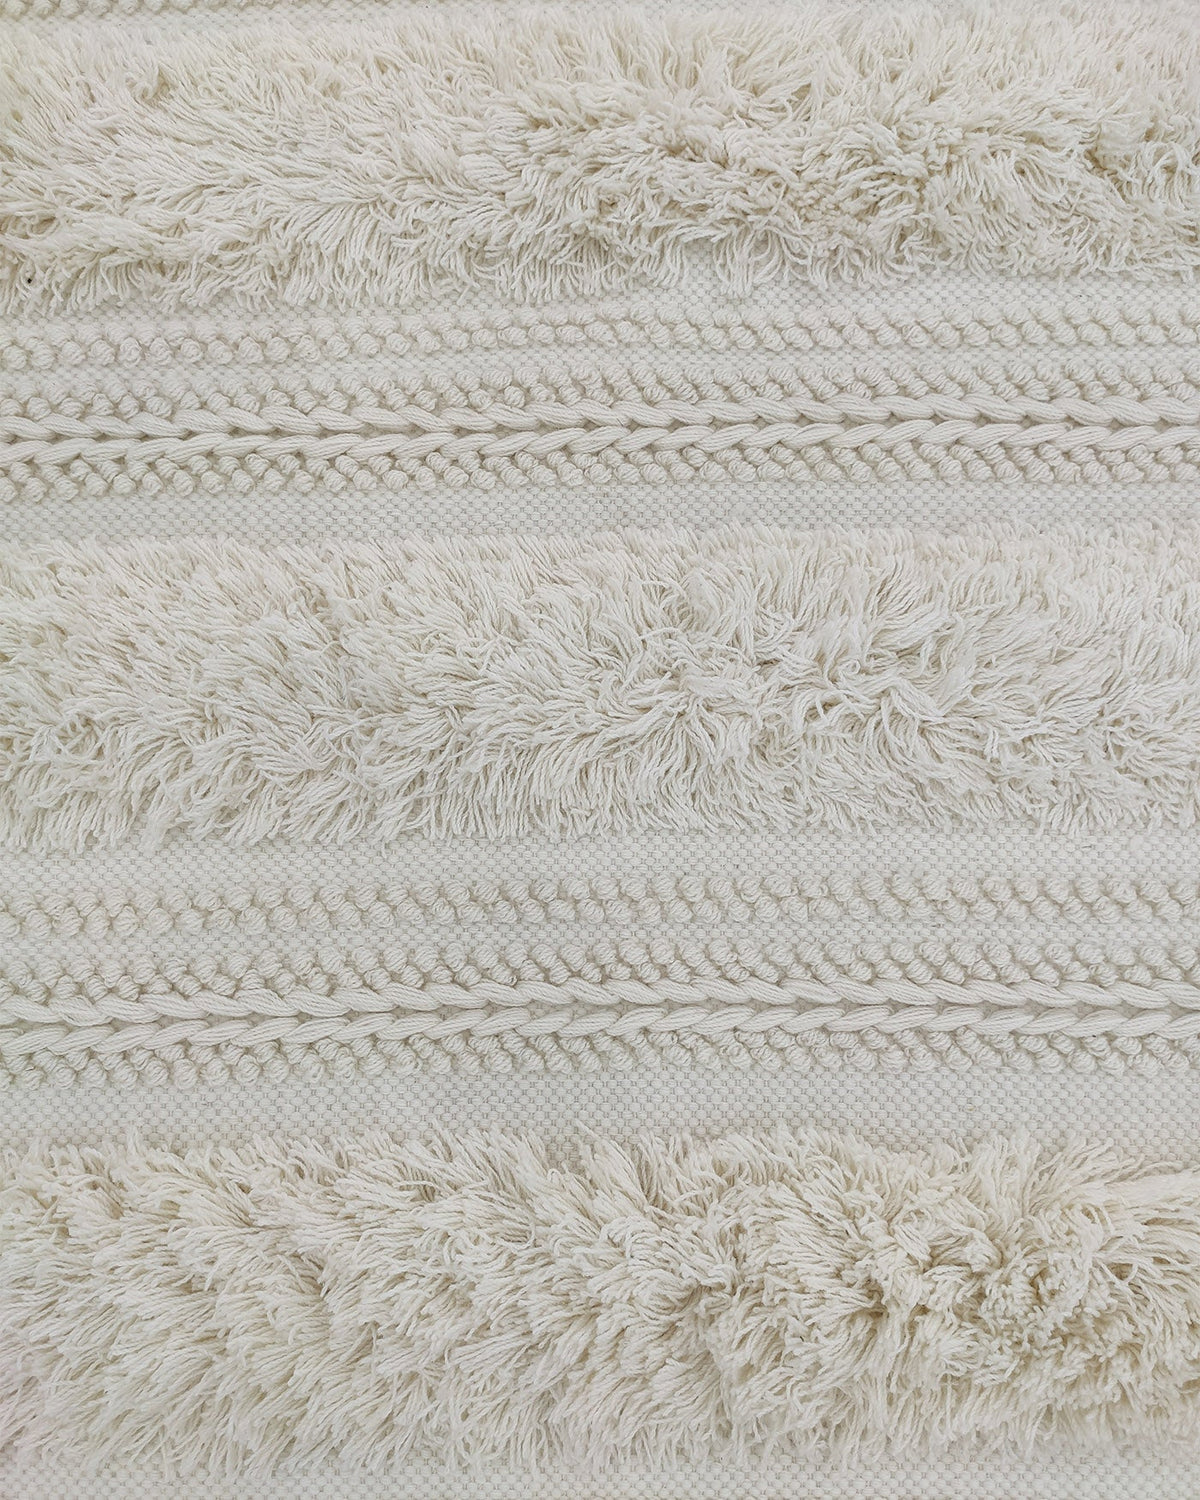 Hand Made Natural White Woven Decor Floor Rug (2 Sizes)